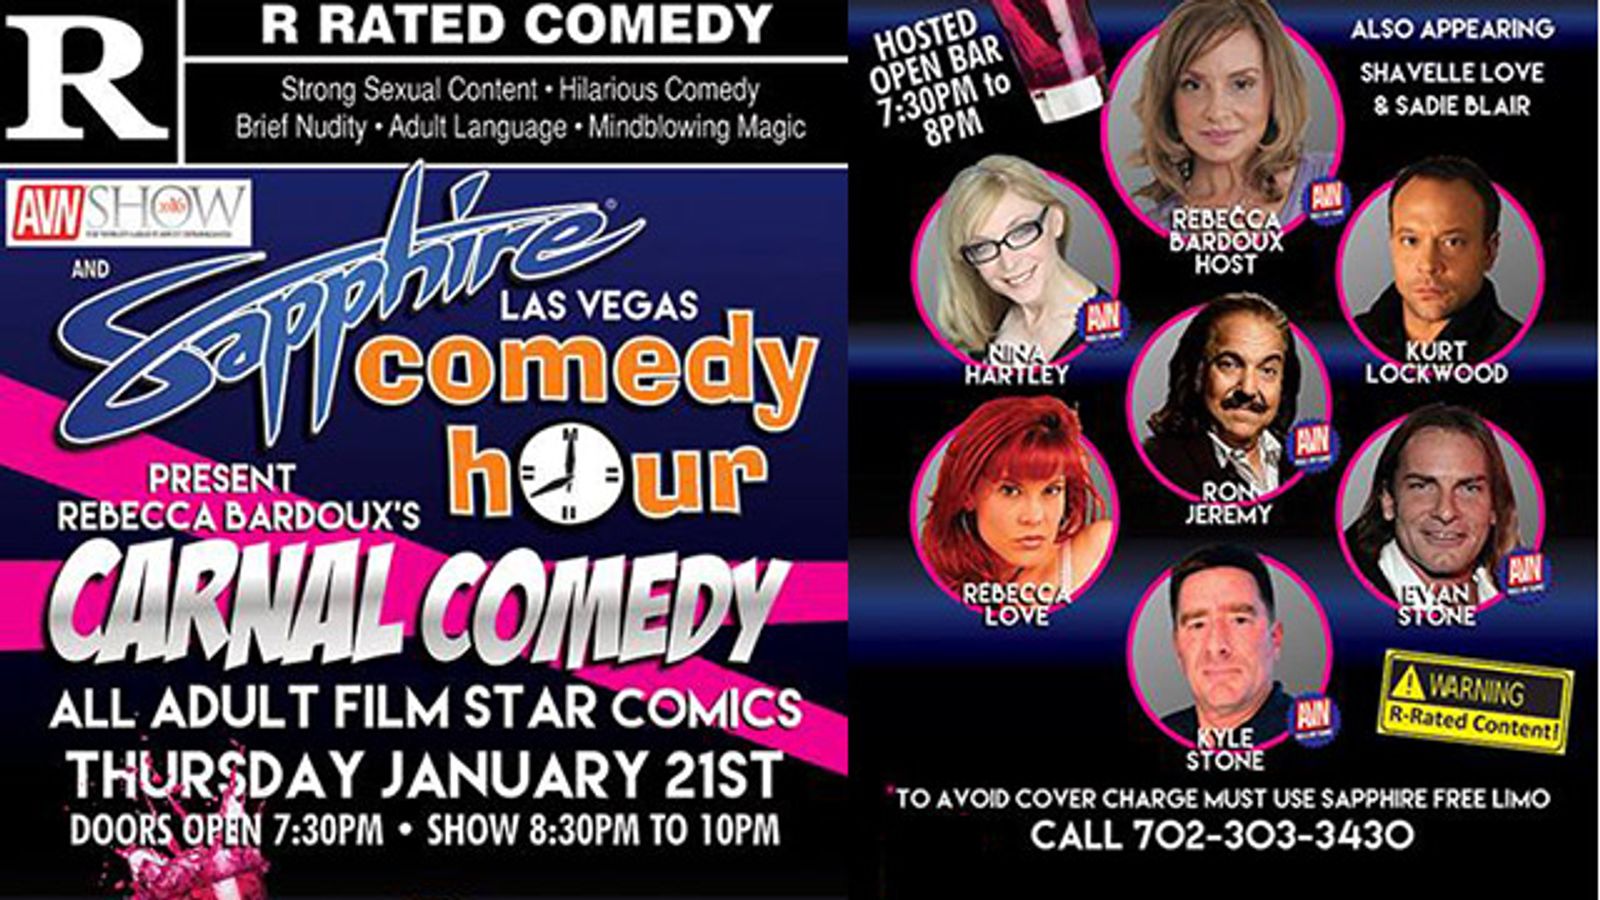 Check Out the Carnal Comedy Show at Sapphire Jan. 21 in Vegas